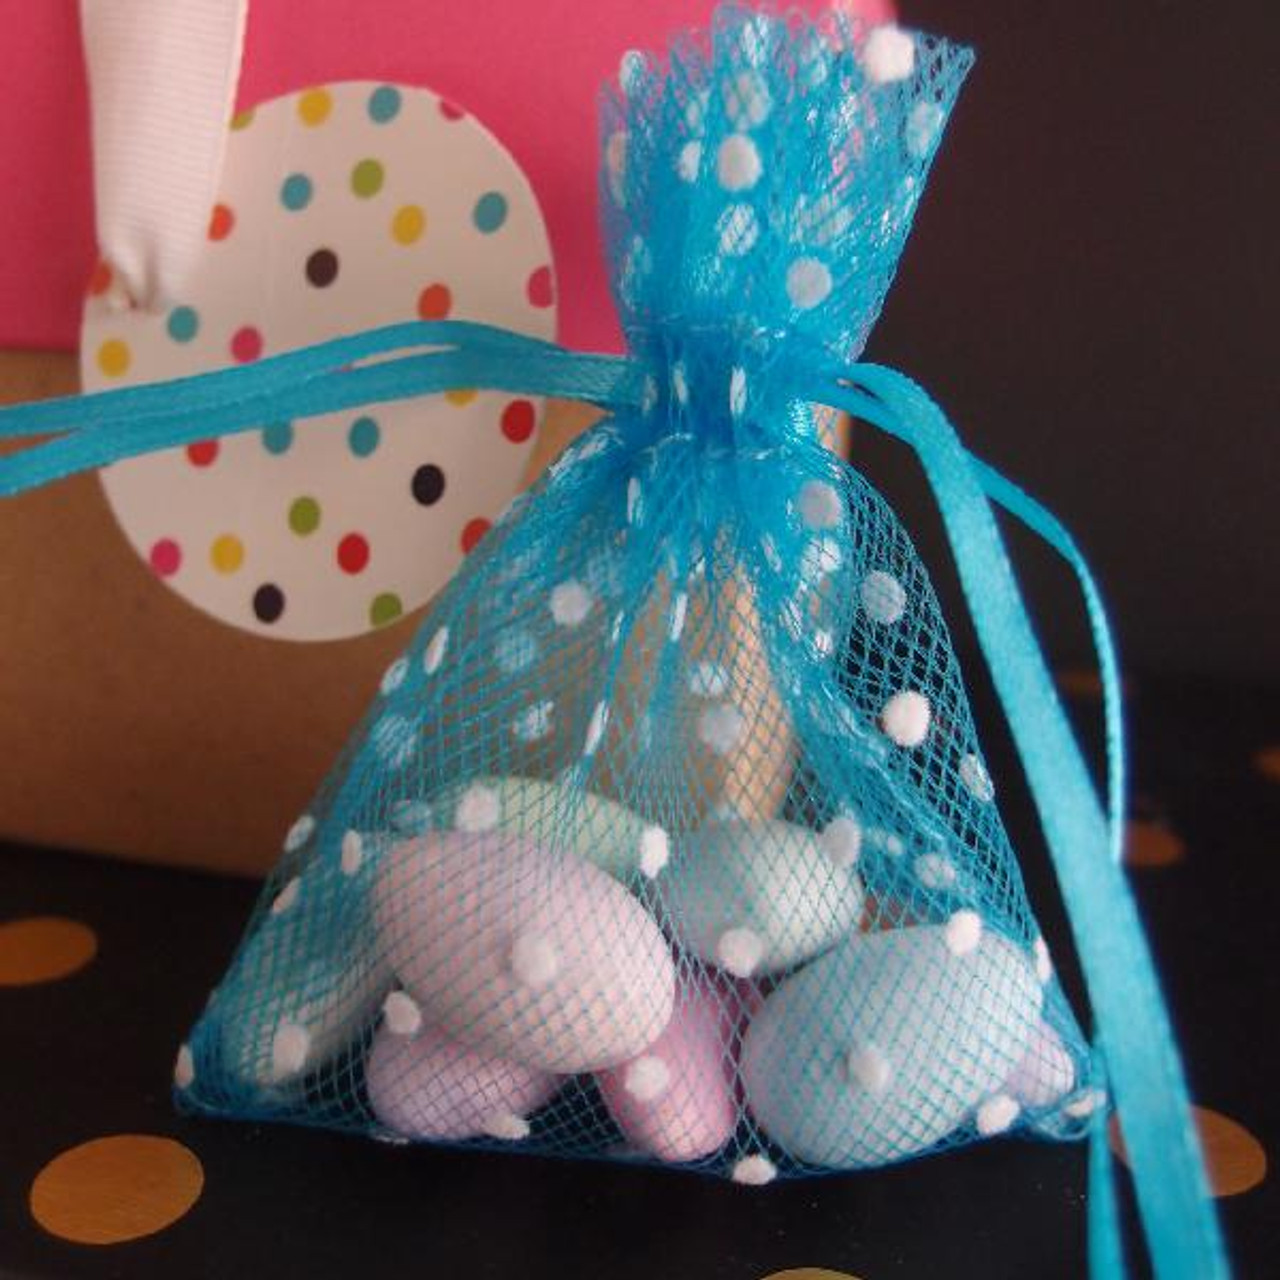 Turquoise Mesh Bag with Felt White Small Dots  (3 Sizes)